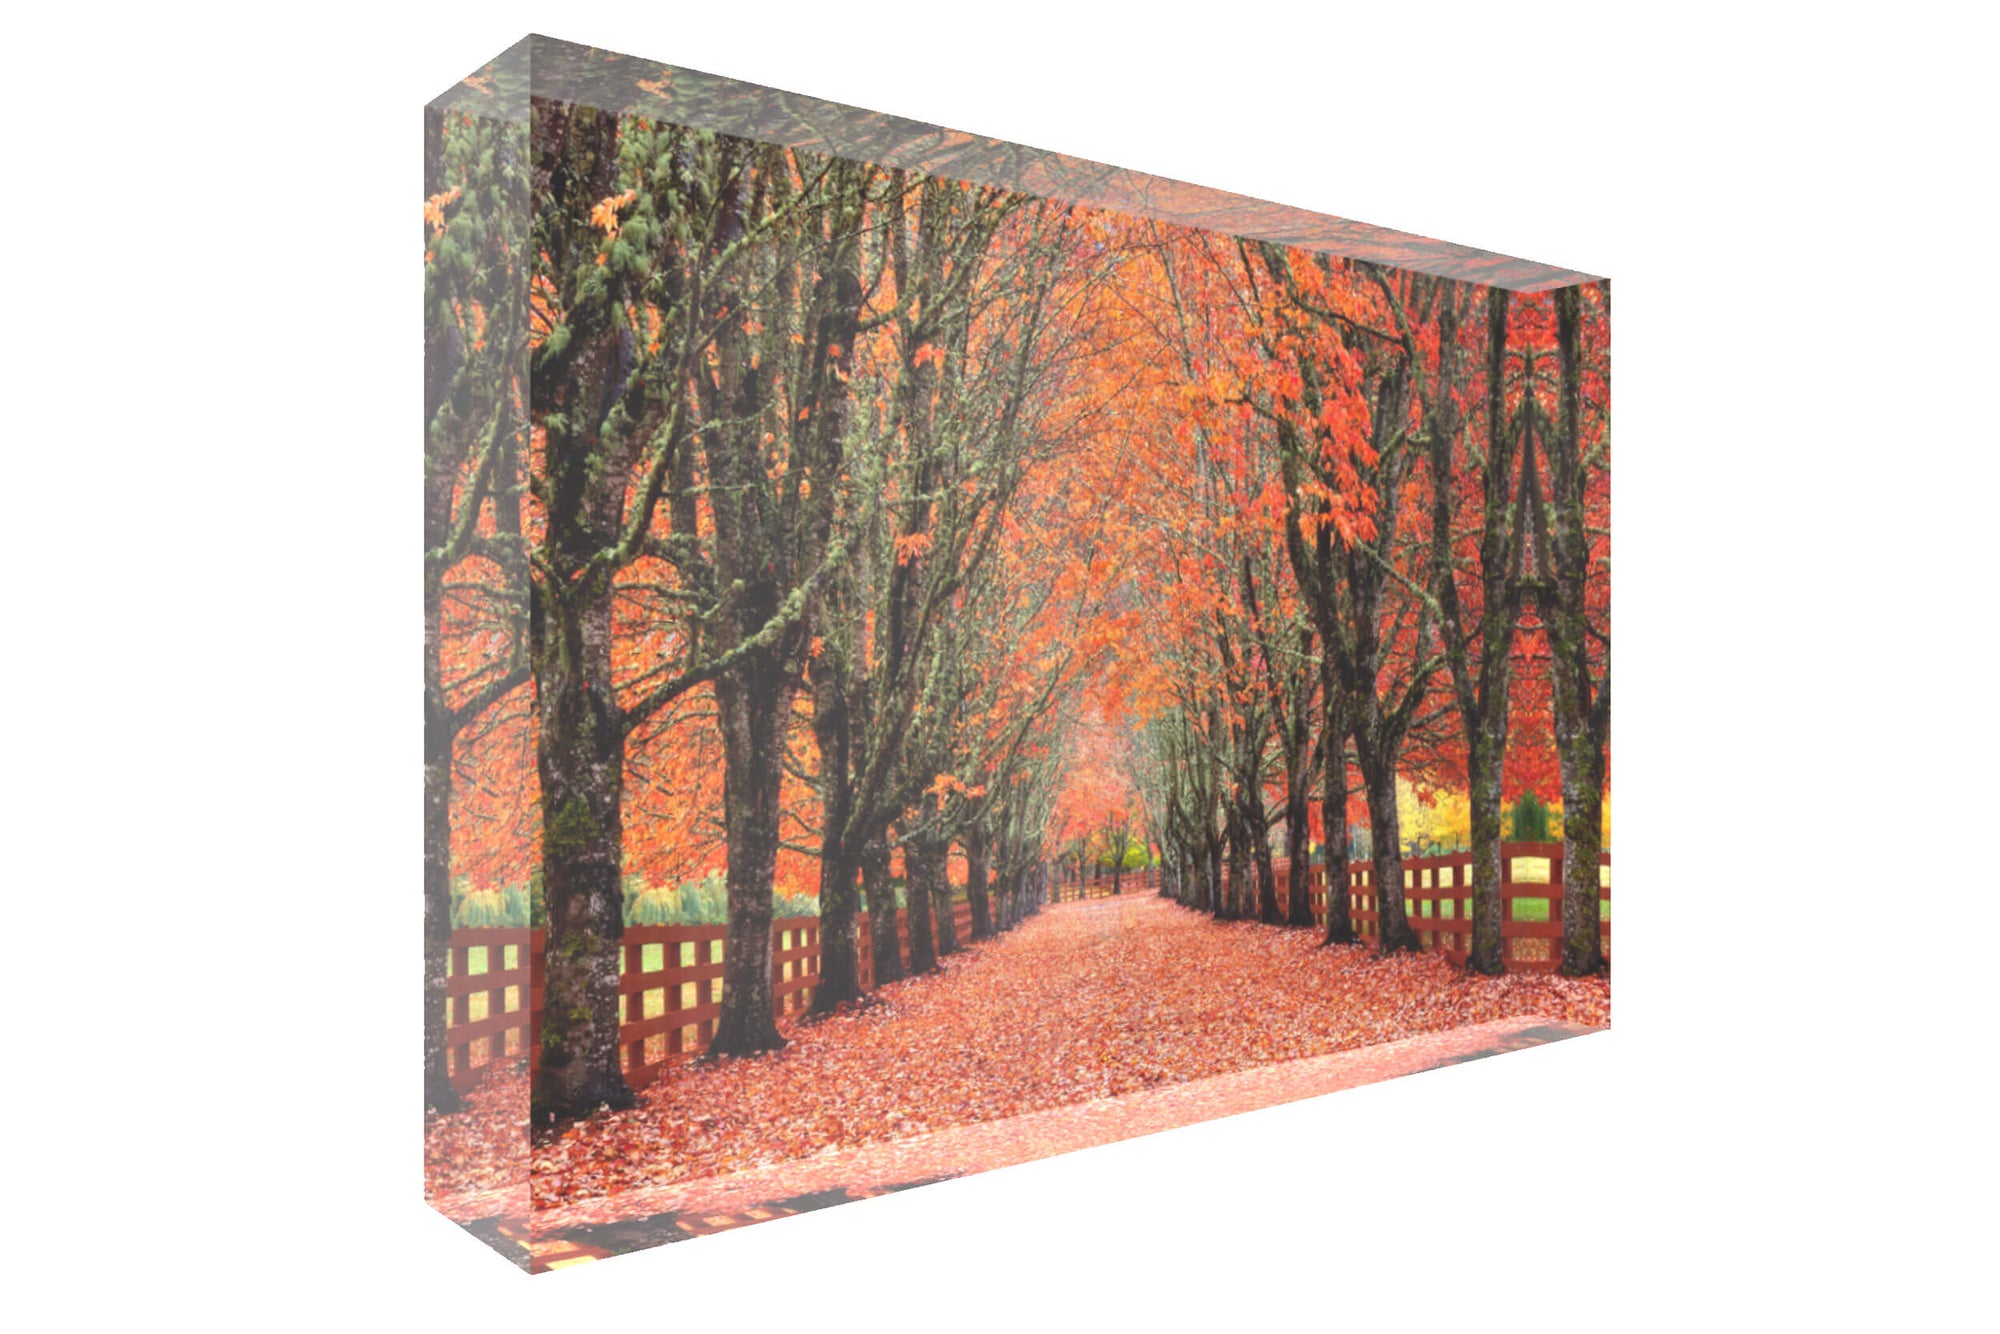 A picture of Rockwood Farm in Snoqualmie shown as an acrylic block.